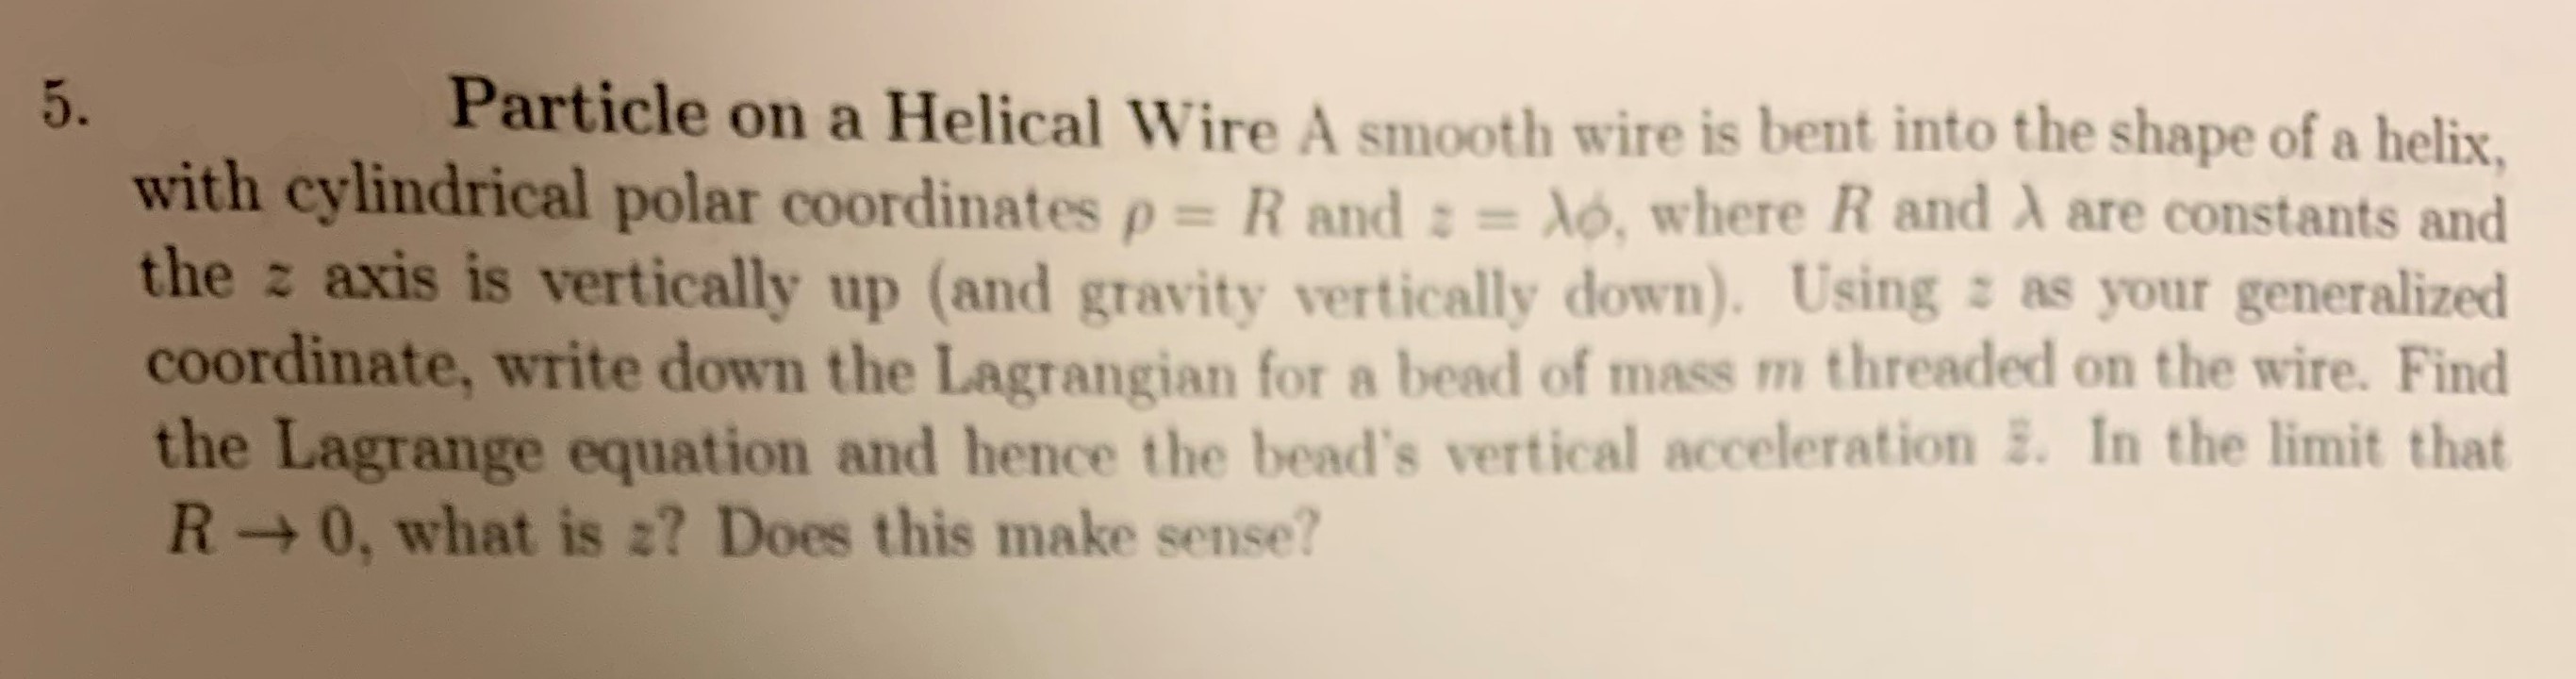 Particle on a Helical Wire A smooth wire is bent into the shape of a helix
5.
with cylindrical polar coordinates p= R and : = dó, where R and A are constants and
the z axis is vertically up (and gravity vertically down). Using z as your generalized
coordinate, write down the Lagrangian for a bead of mass m threaded on the wire. Find
the Lagrange equation and hence the bead's vertical acceleration . In the limit that
R 0, what is 2? Does this make sense?
